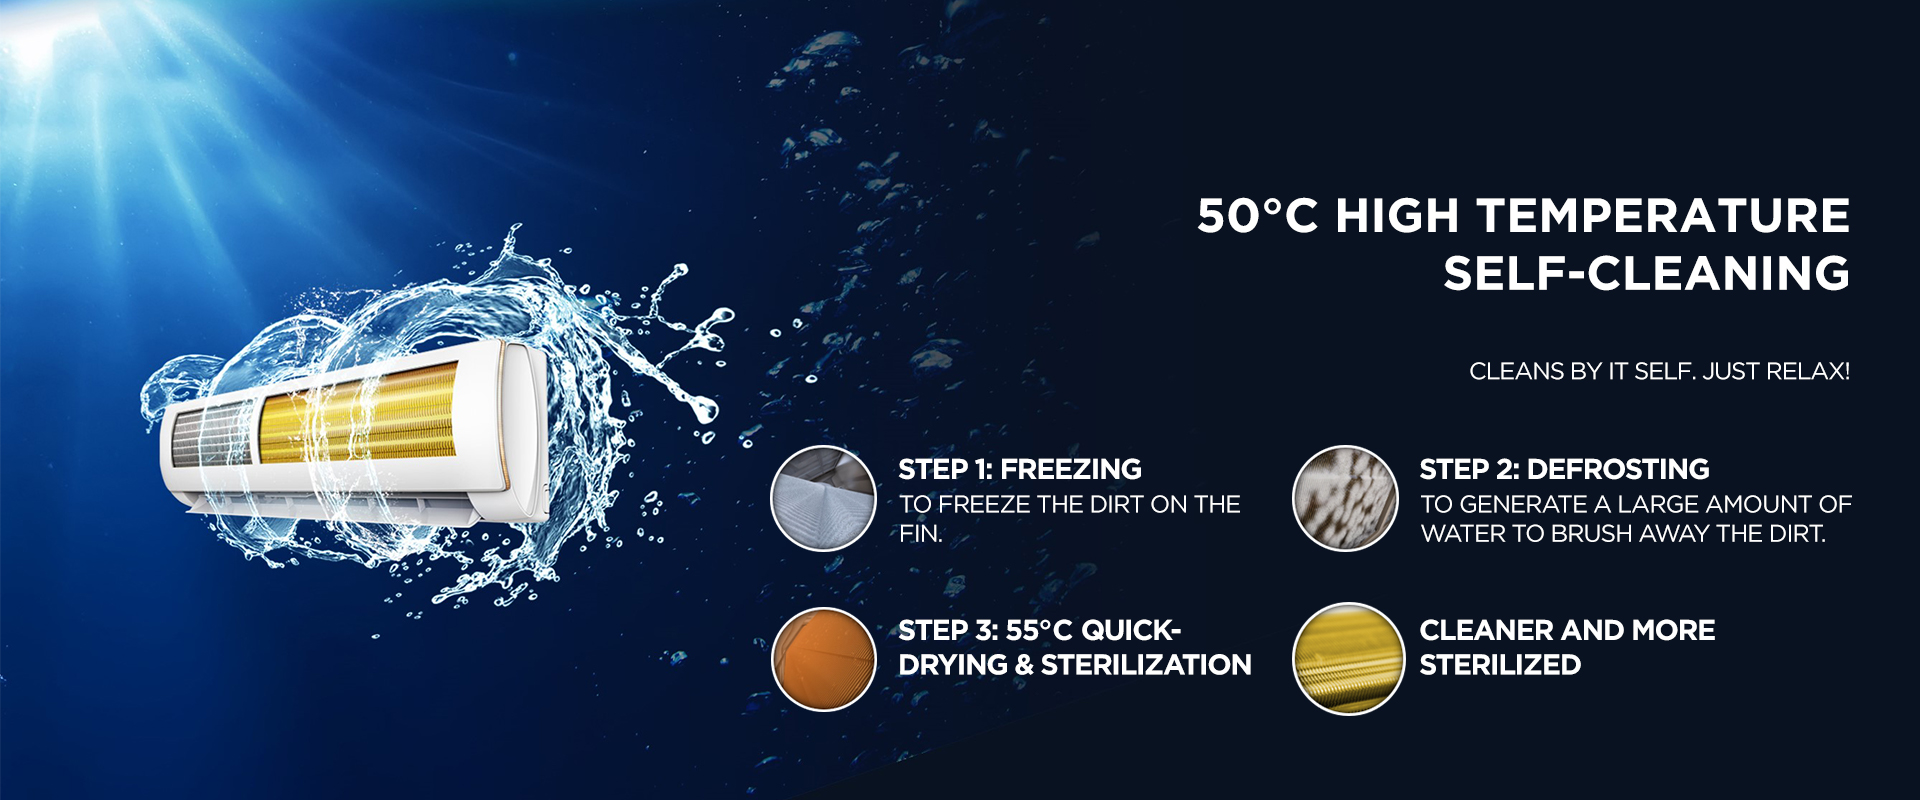 50°c High Temperature Self-cleaning - Cleans by it self. Just relax! 